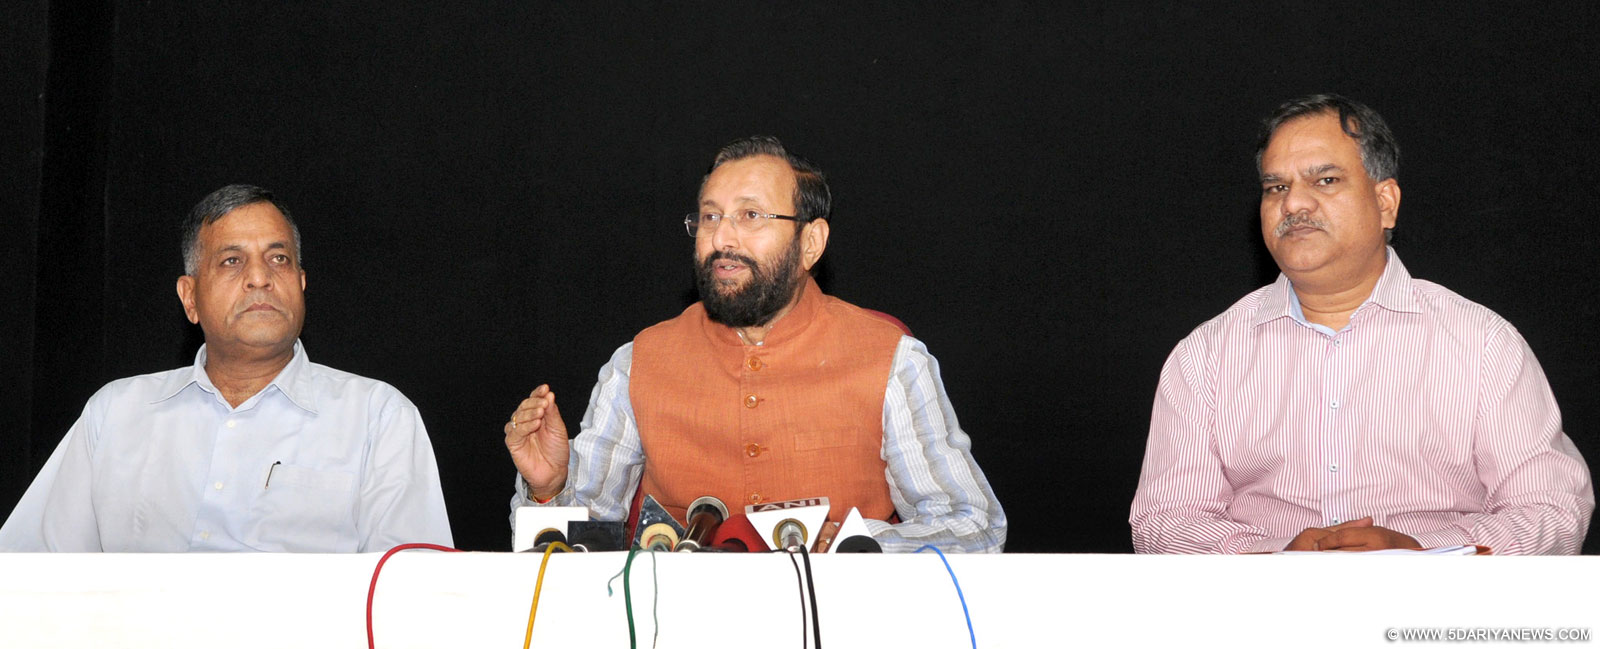 The Minister of State for Environment, Forest and Climate Change (Independent Charge), Shri Prakash Javadekar addressing a press conference on Sand Mining, in New Delhi on September 24, 2015. The Secretary, Ministry of Environment, Forest and Climate Change, Shri Ashok Lavasa is also seen.